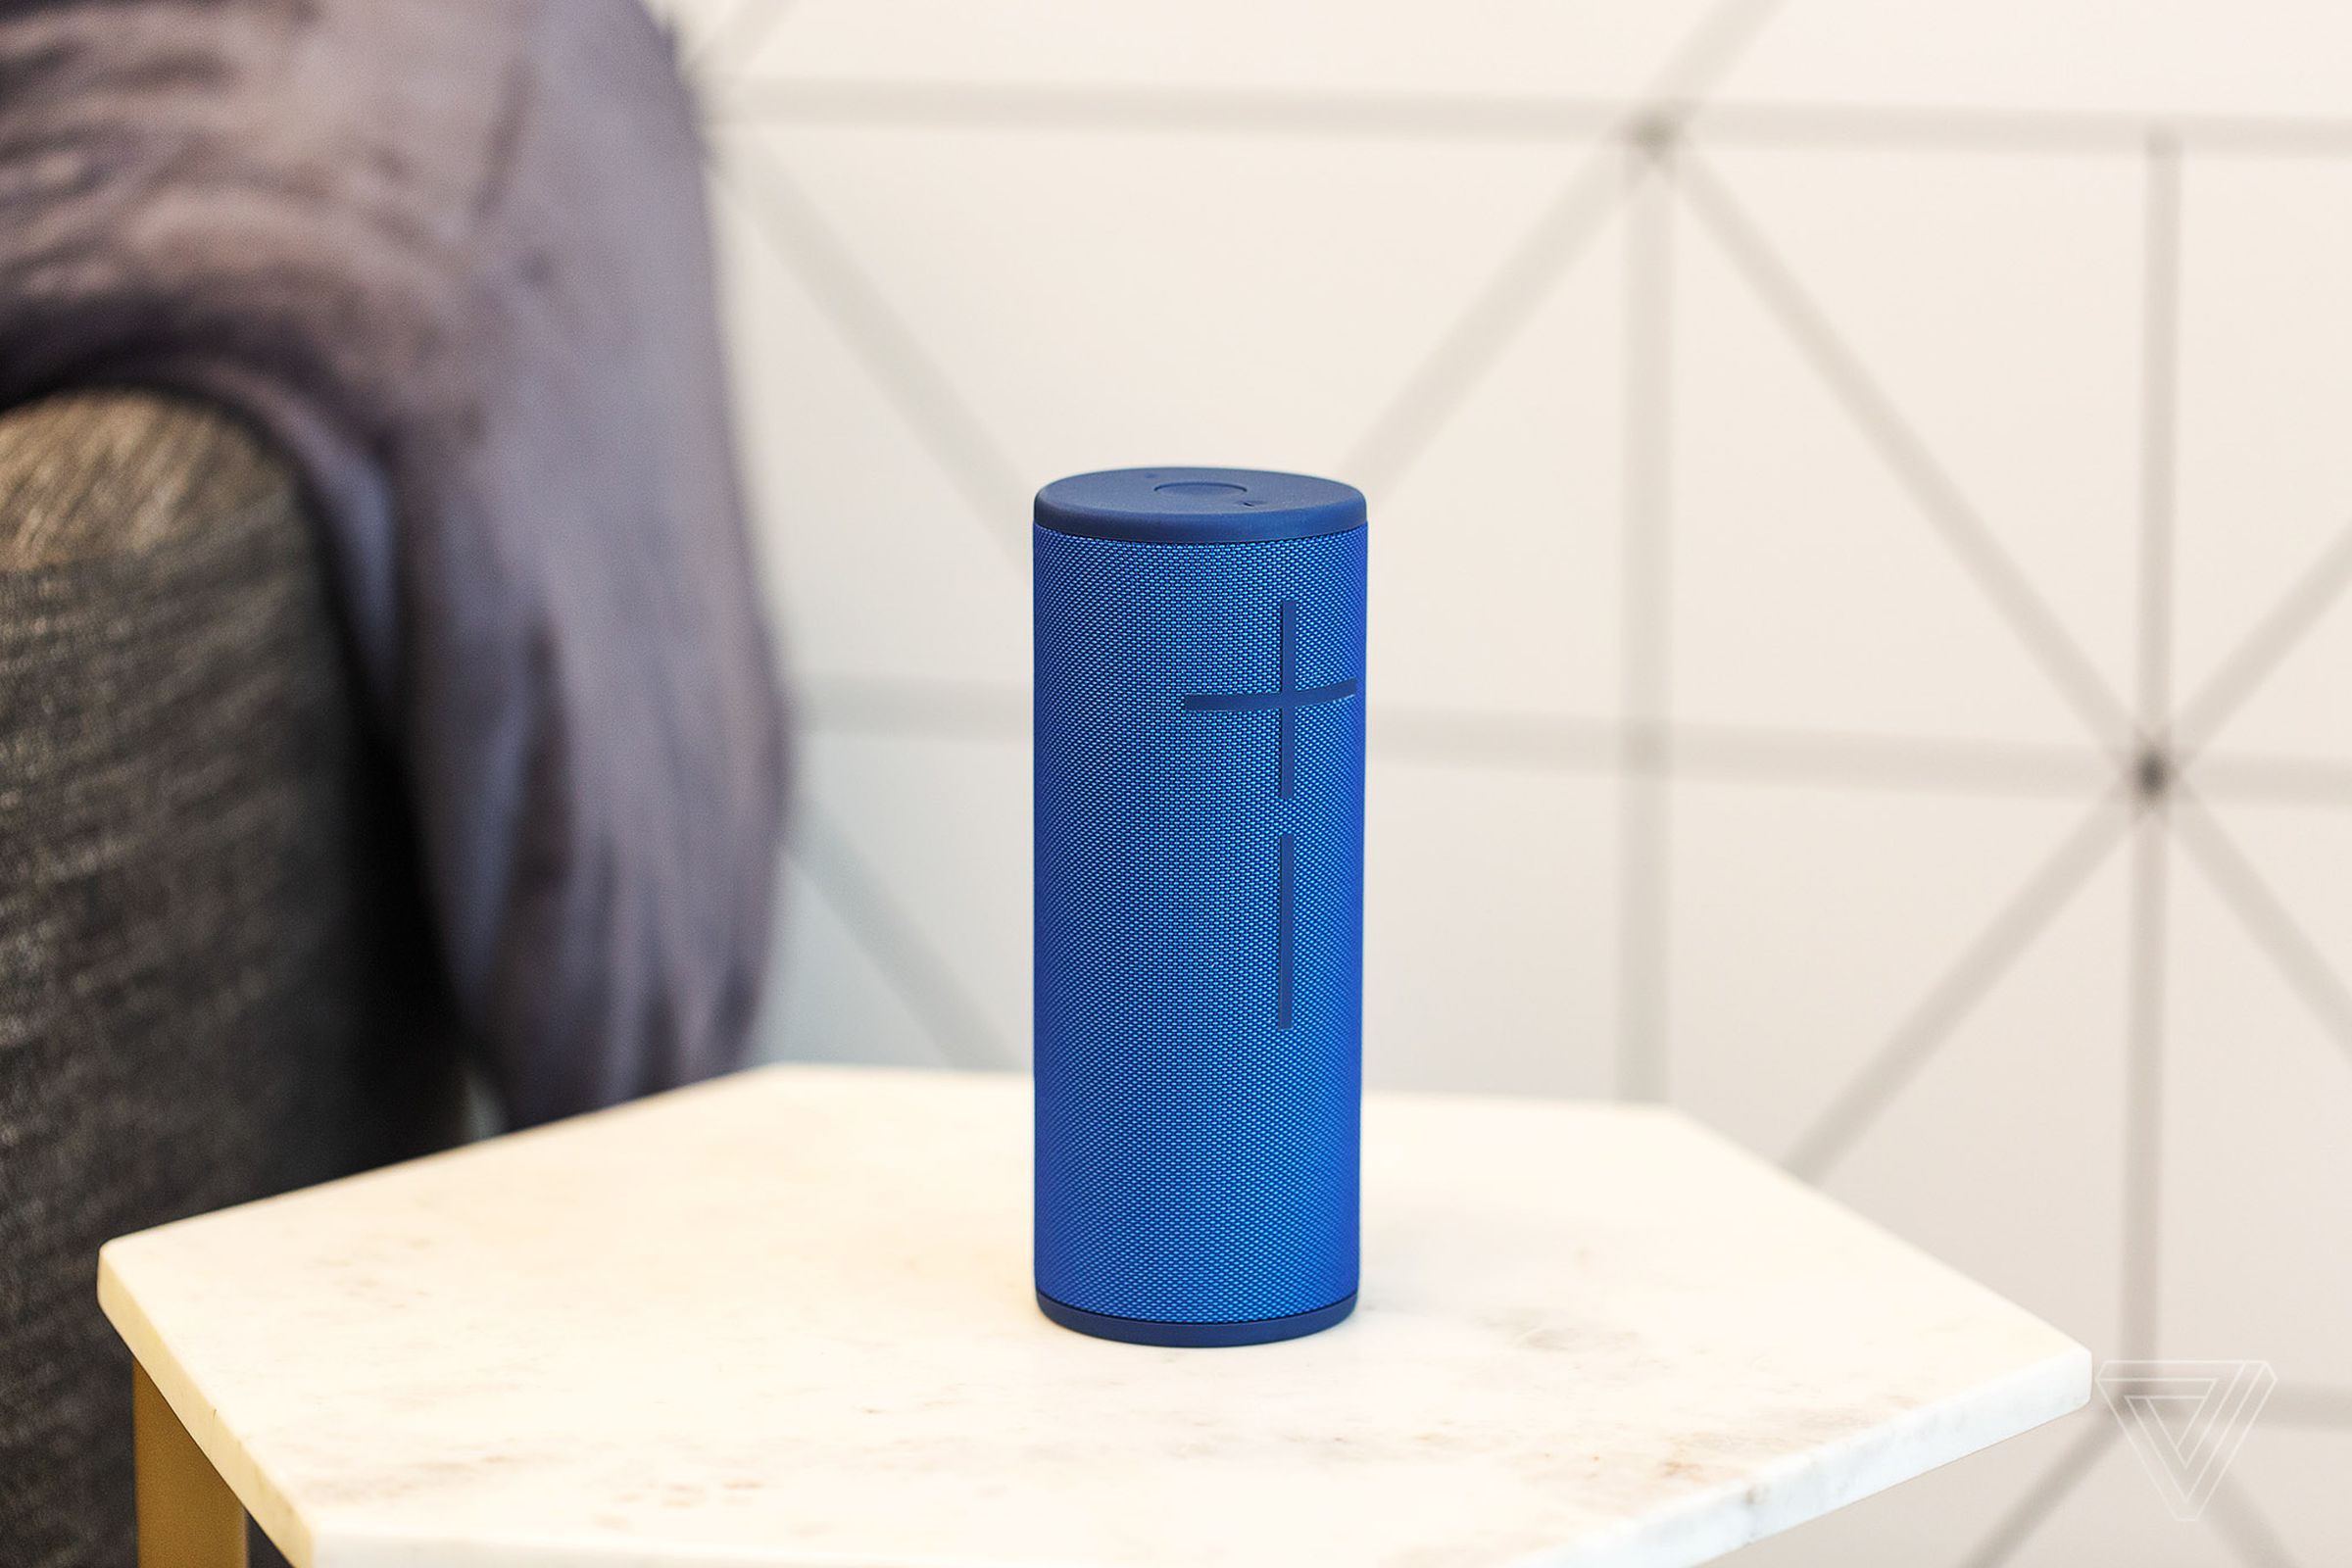 The UE Boom 3 remains a popular Bluetooth speaker several years after release.